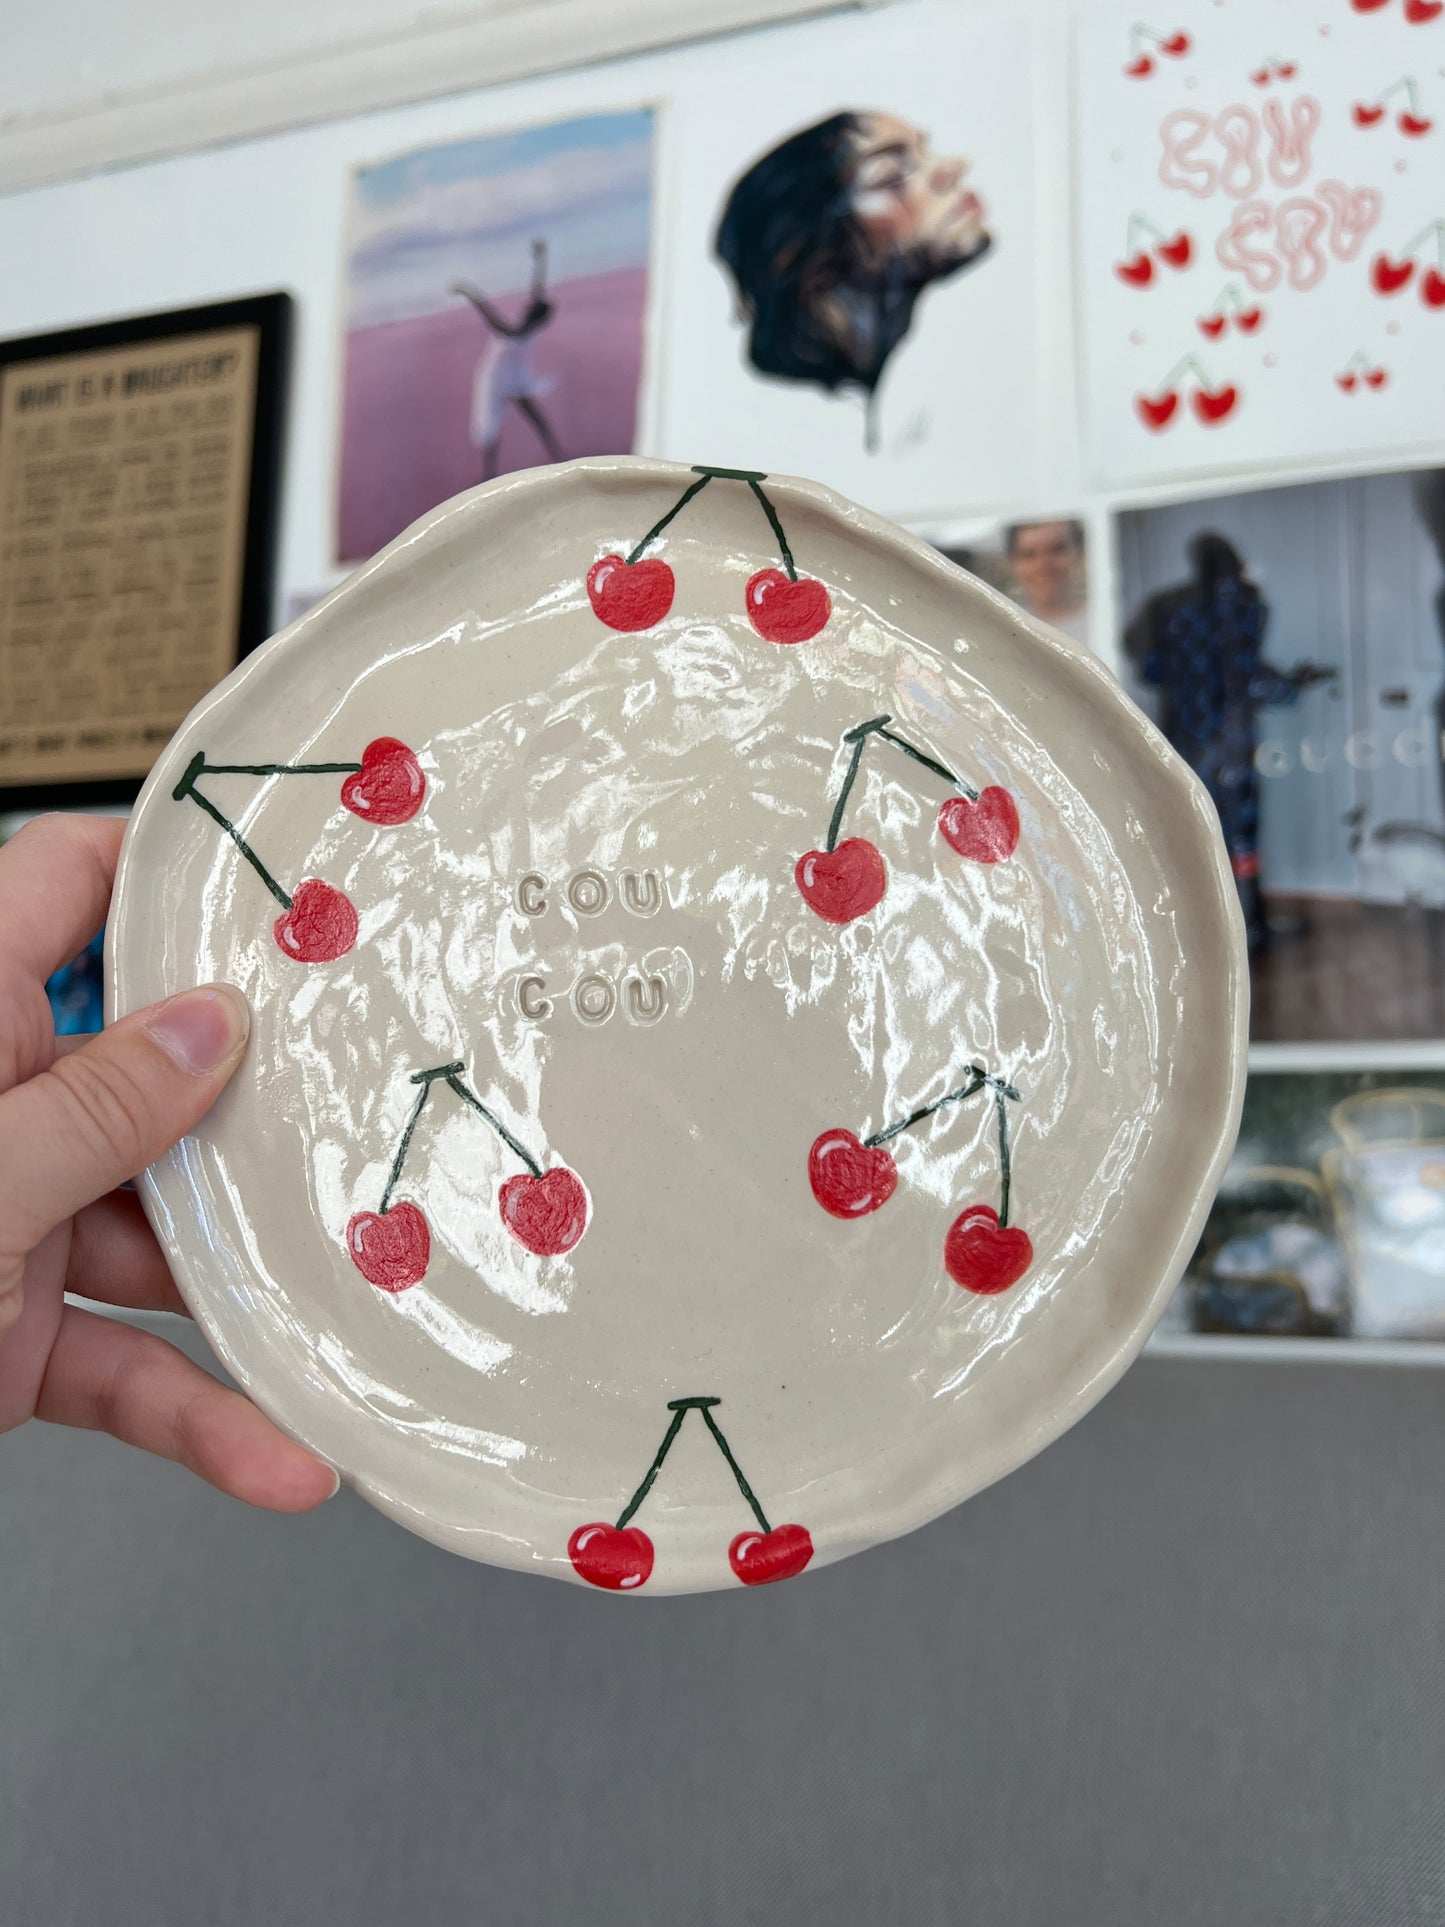 The cherry plate